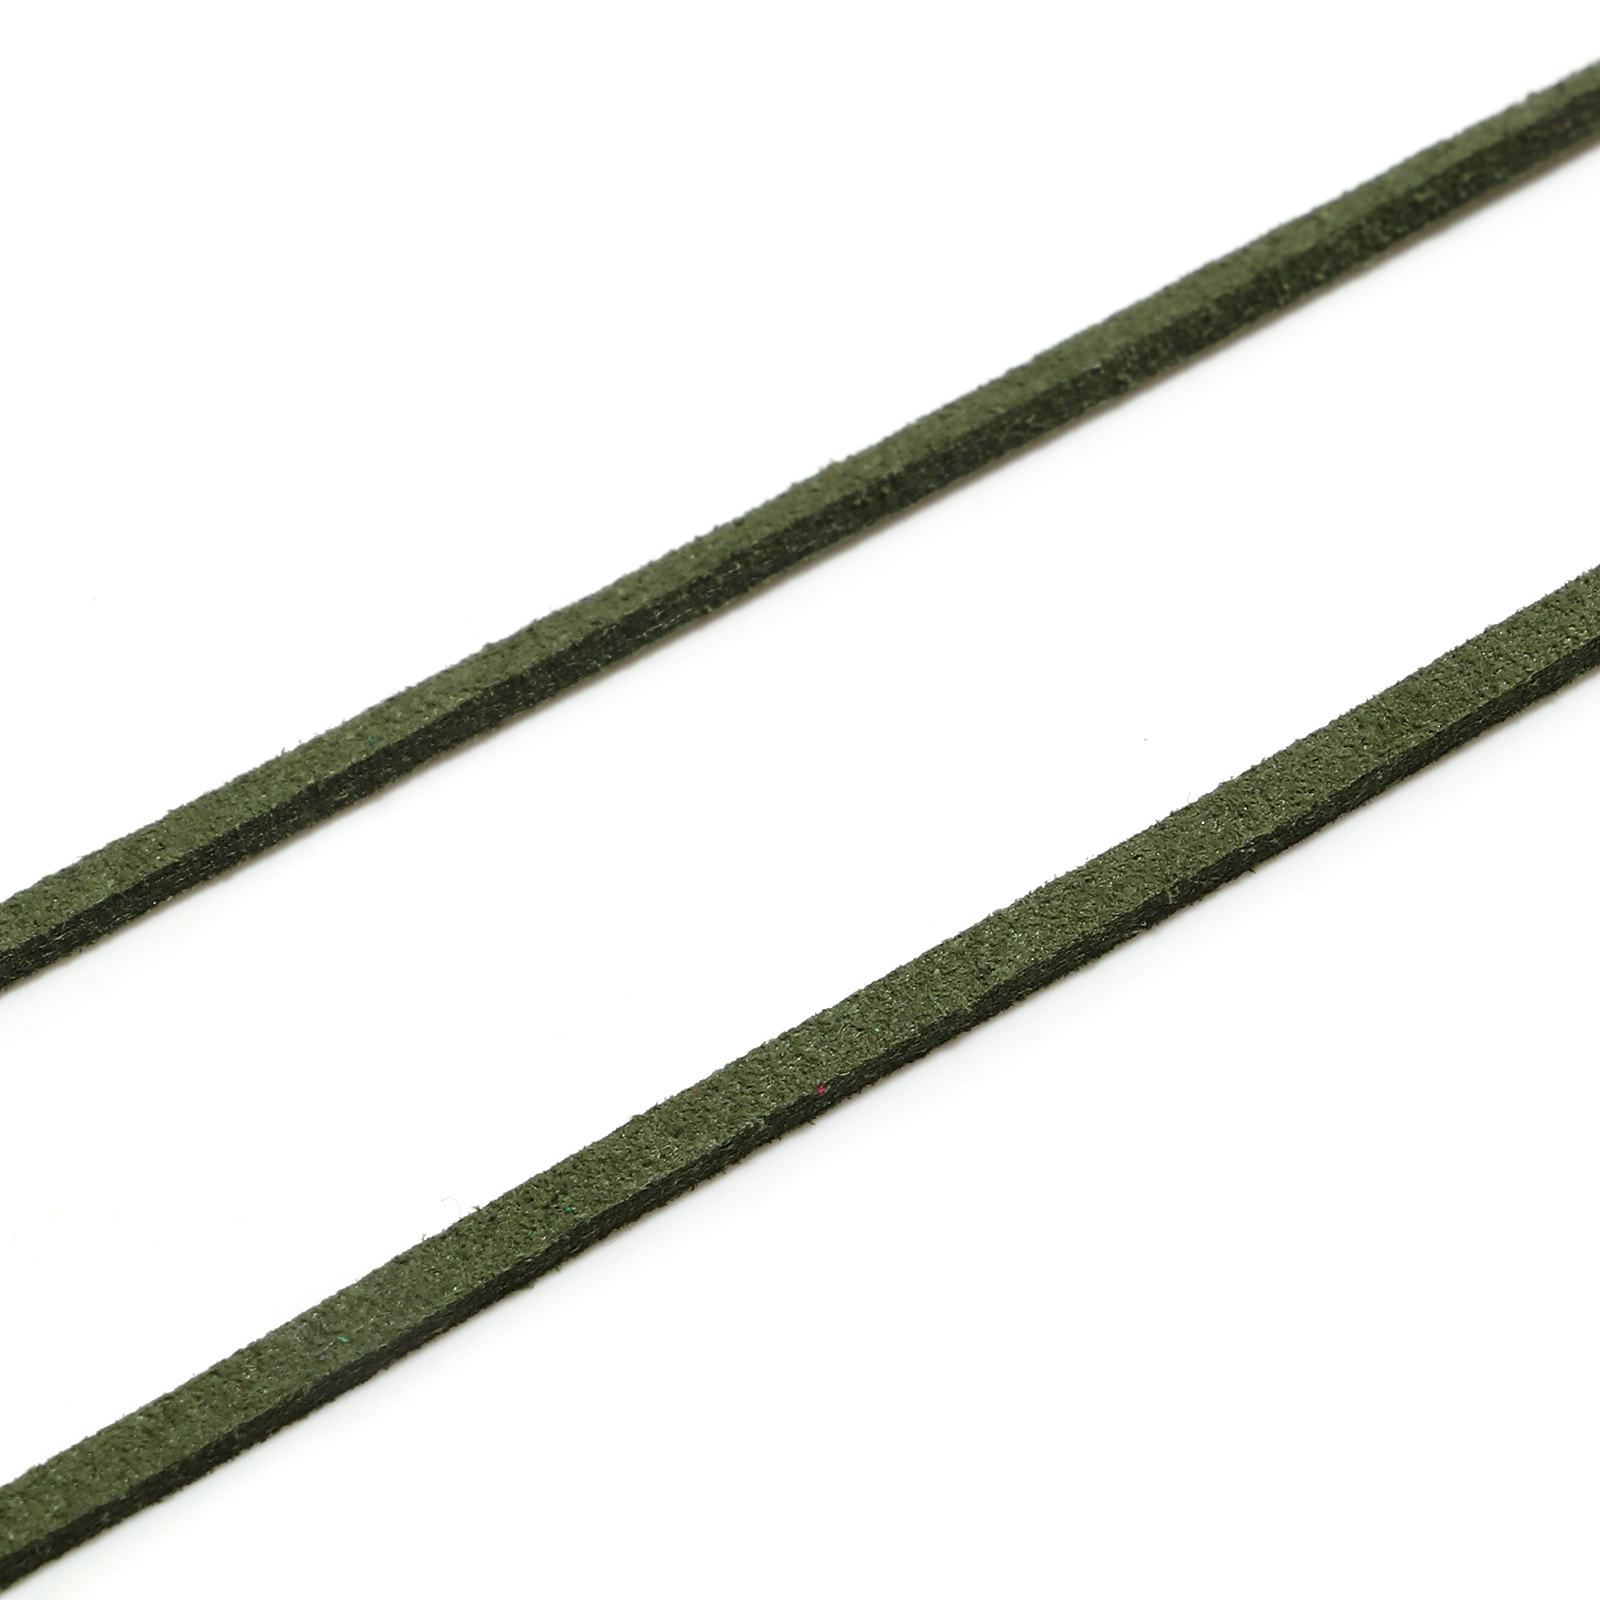 Picture of Velvet Jewelry Cord Rope Dark Green Faux Suede 3mm, 1 Bundle (Approx 5 M/Bundle)